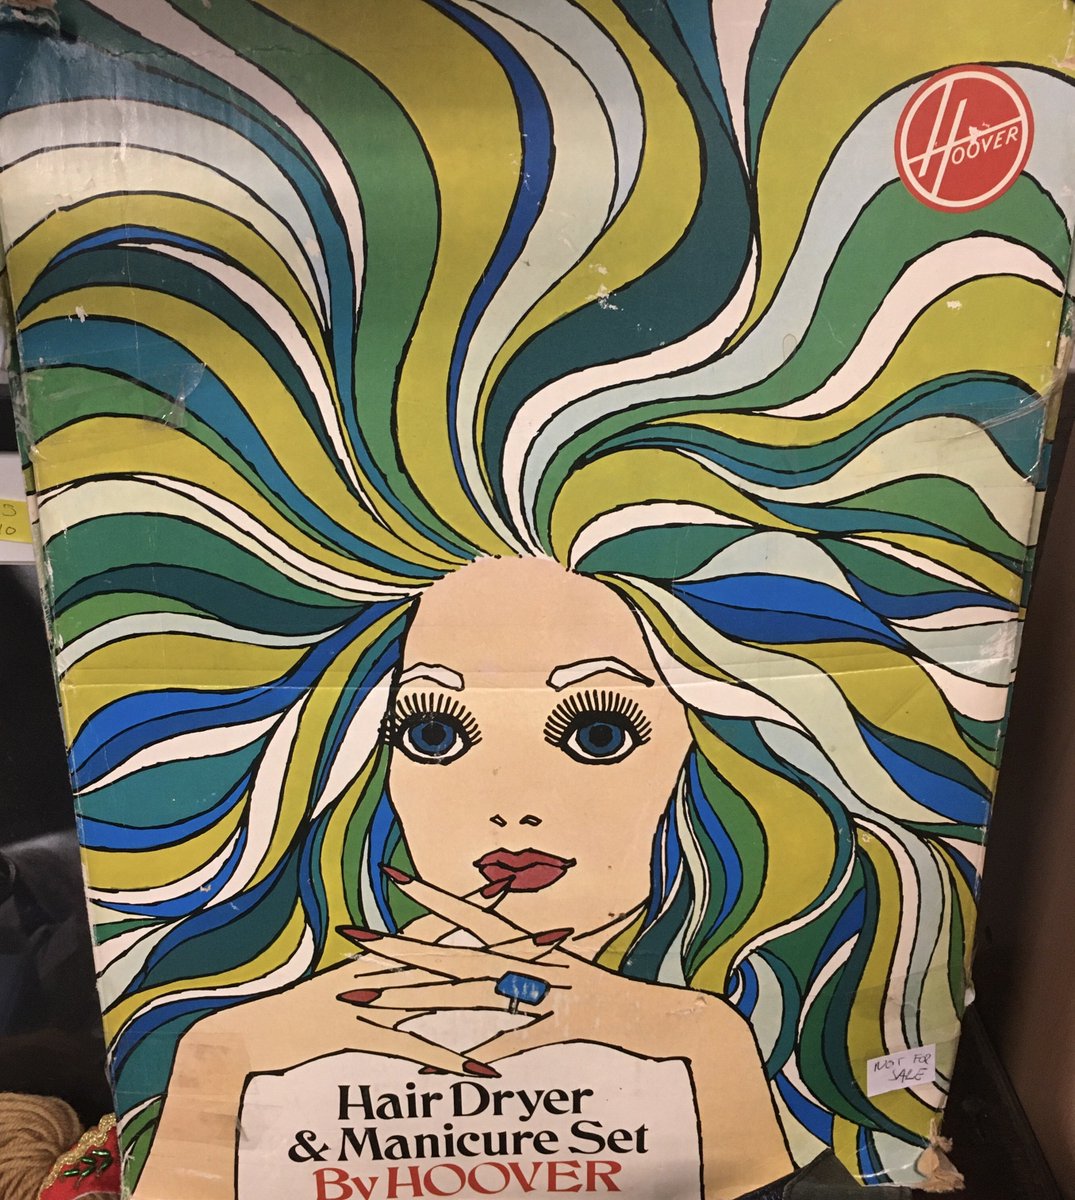 Fabulous psychedelic hair 💚
Hoover hairdryer box